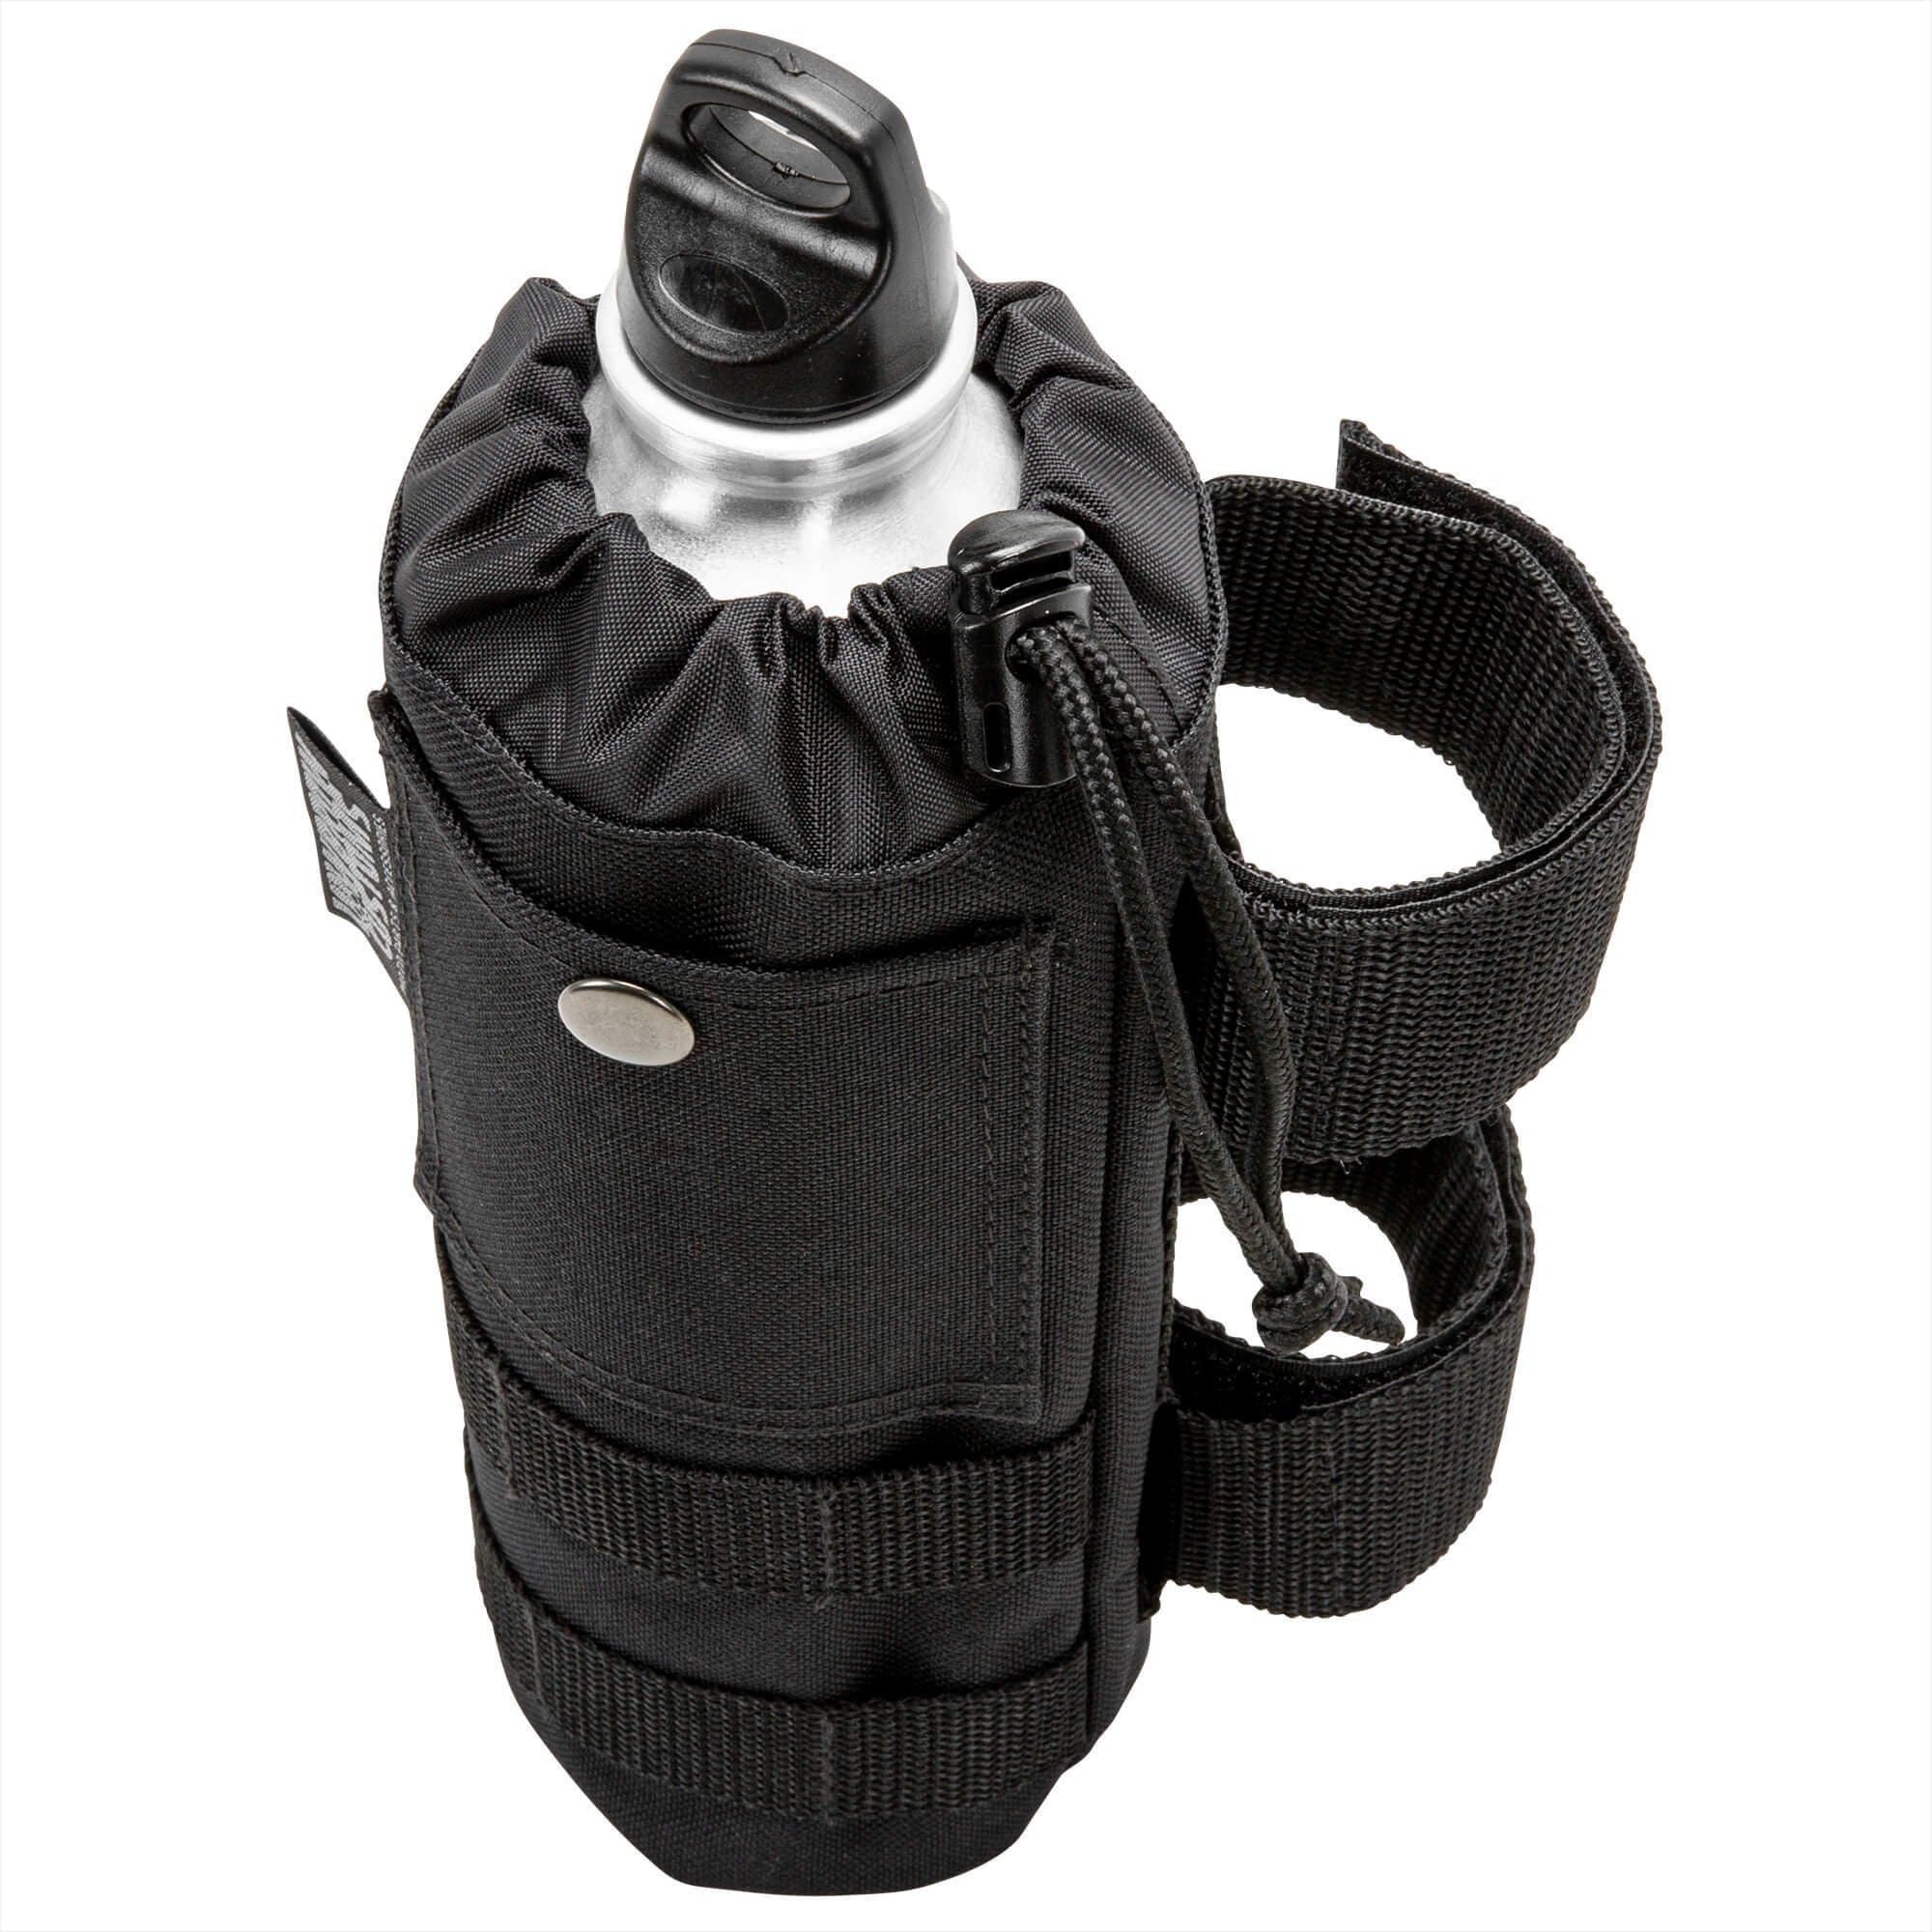 Lowbrow Customs Fuel Reserve Bottle and Carrier 2.0 Combo - Save $4.95!